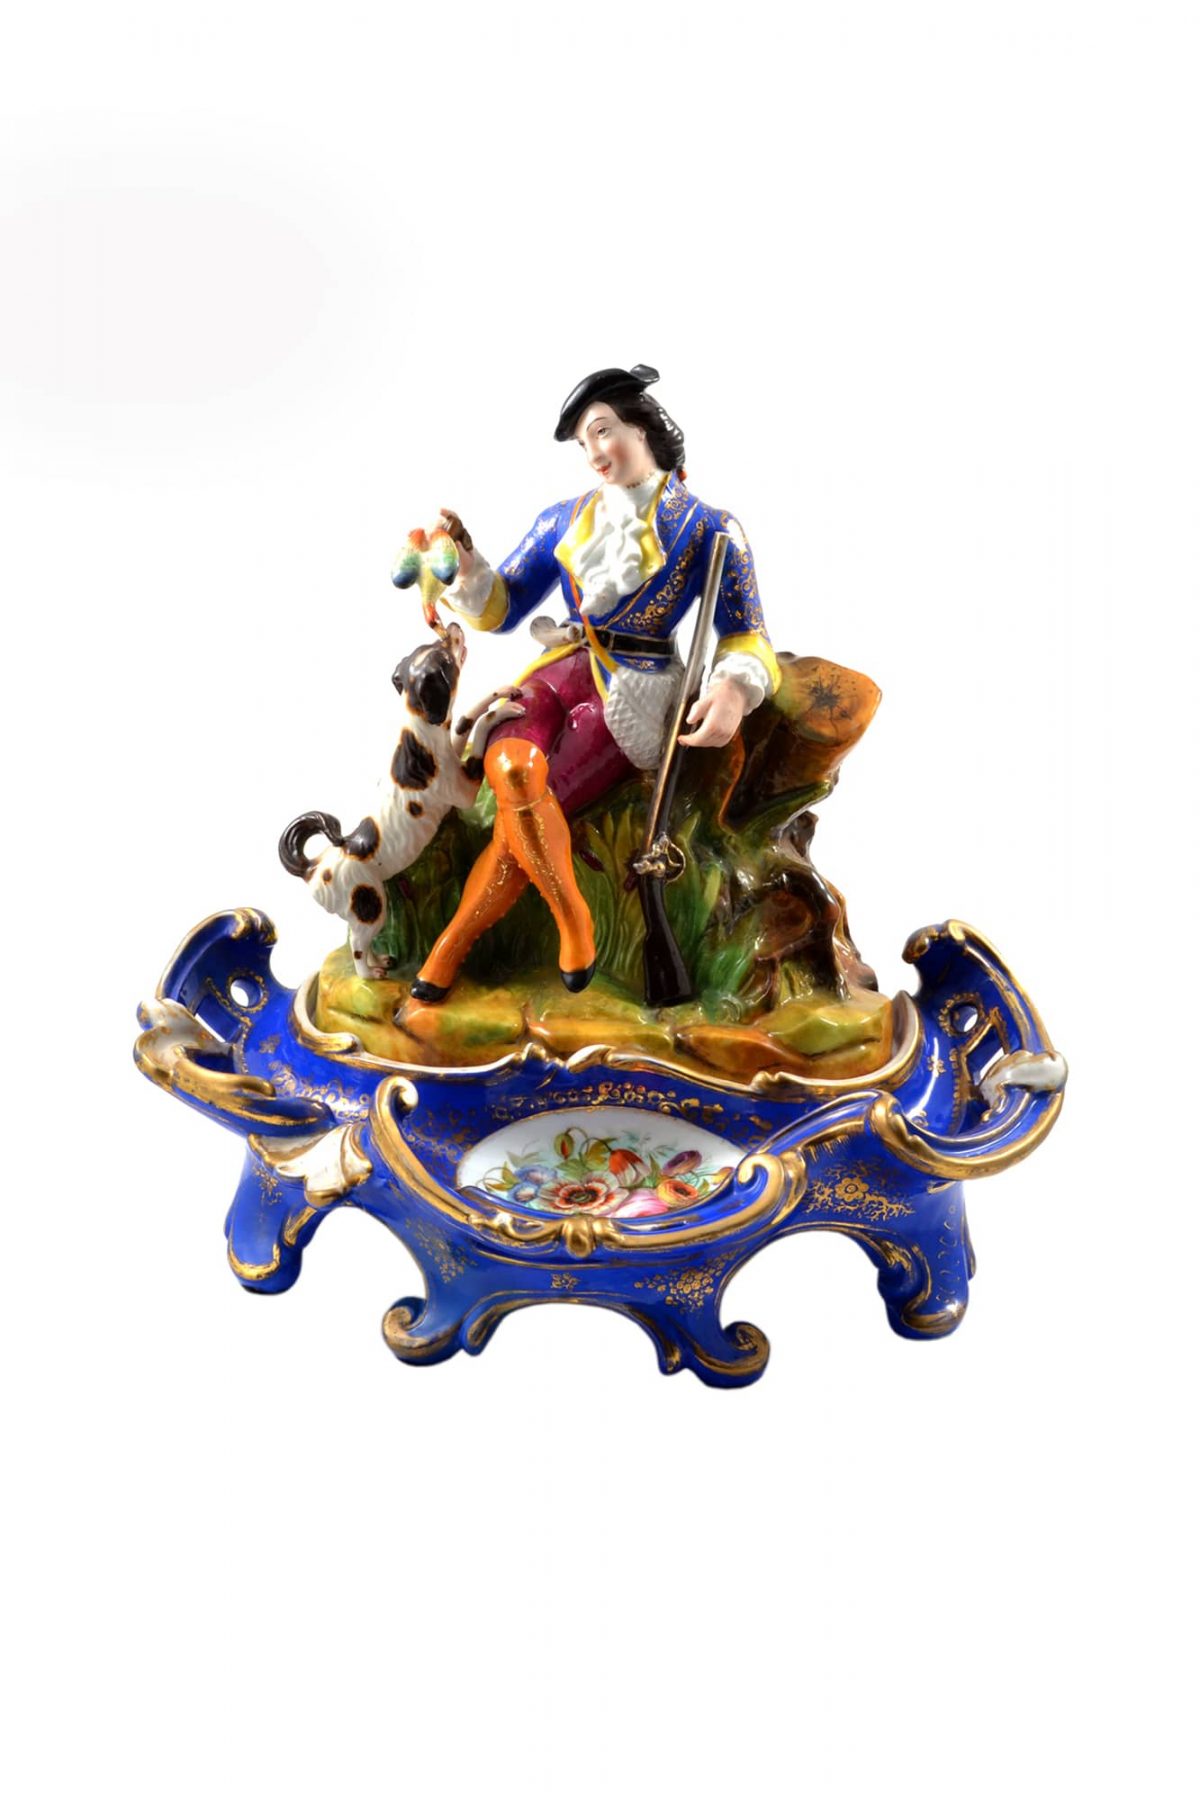 Antique Porcelain Figural Large Inkwell with Sand Shaker and Desk Tray, Old Paris France Early 19th Century